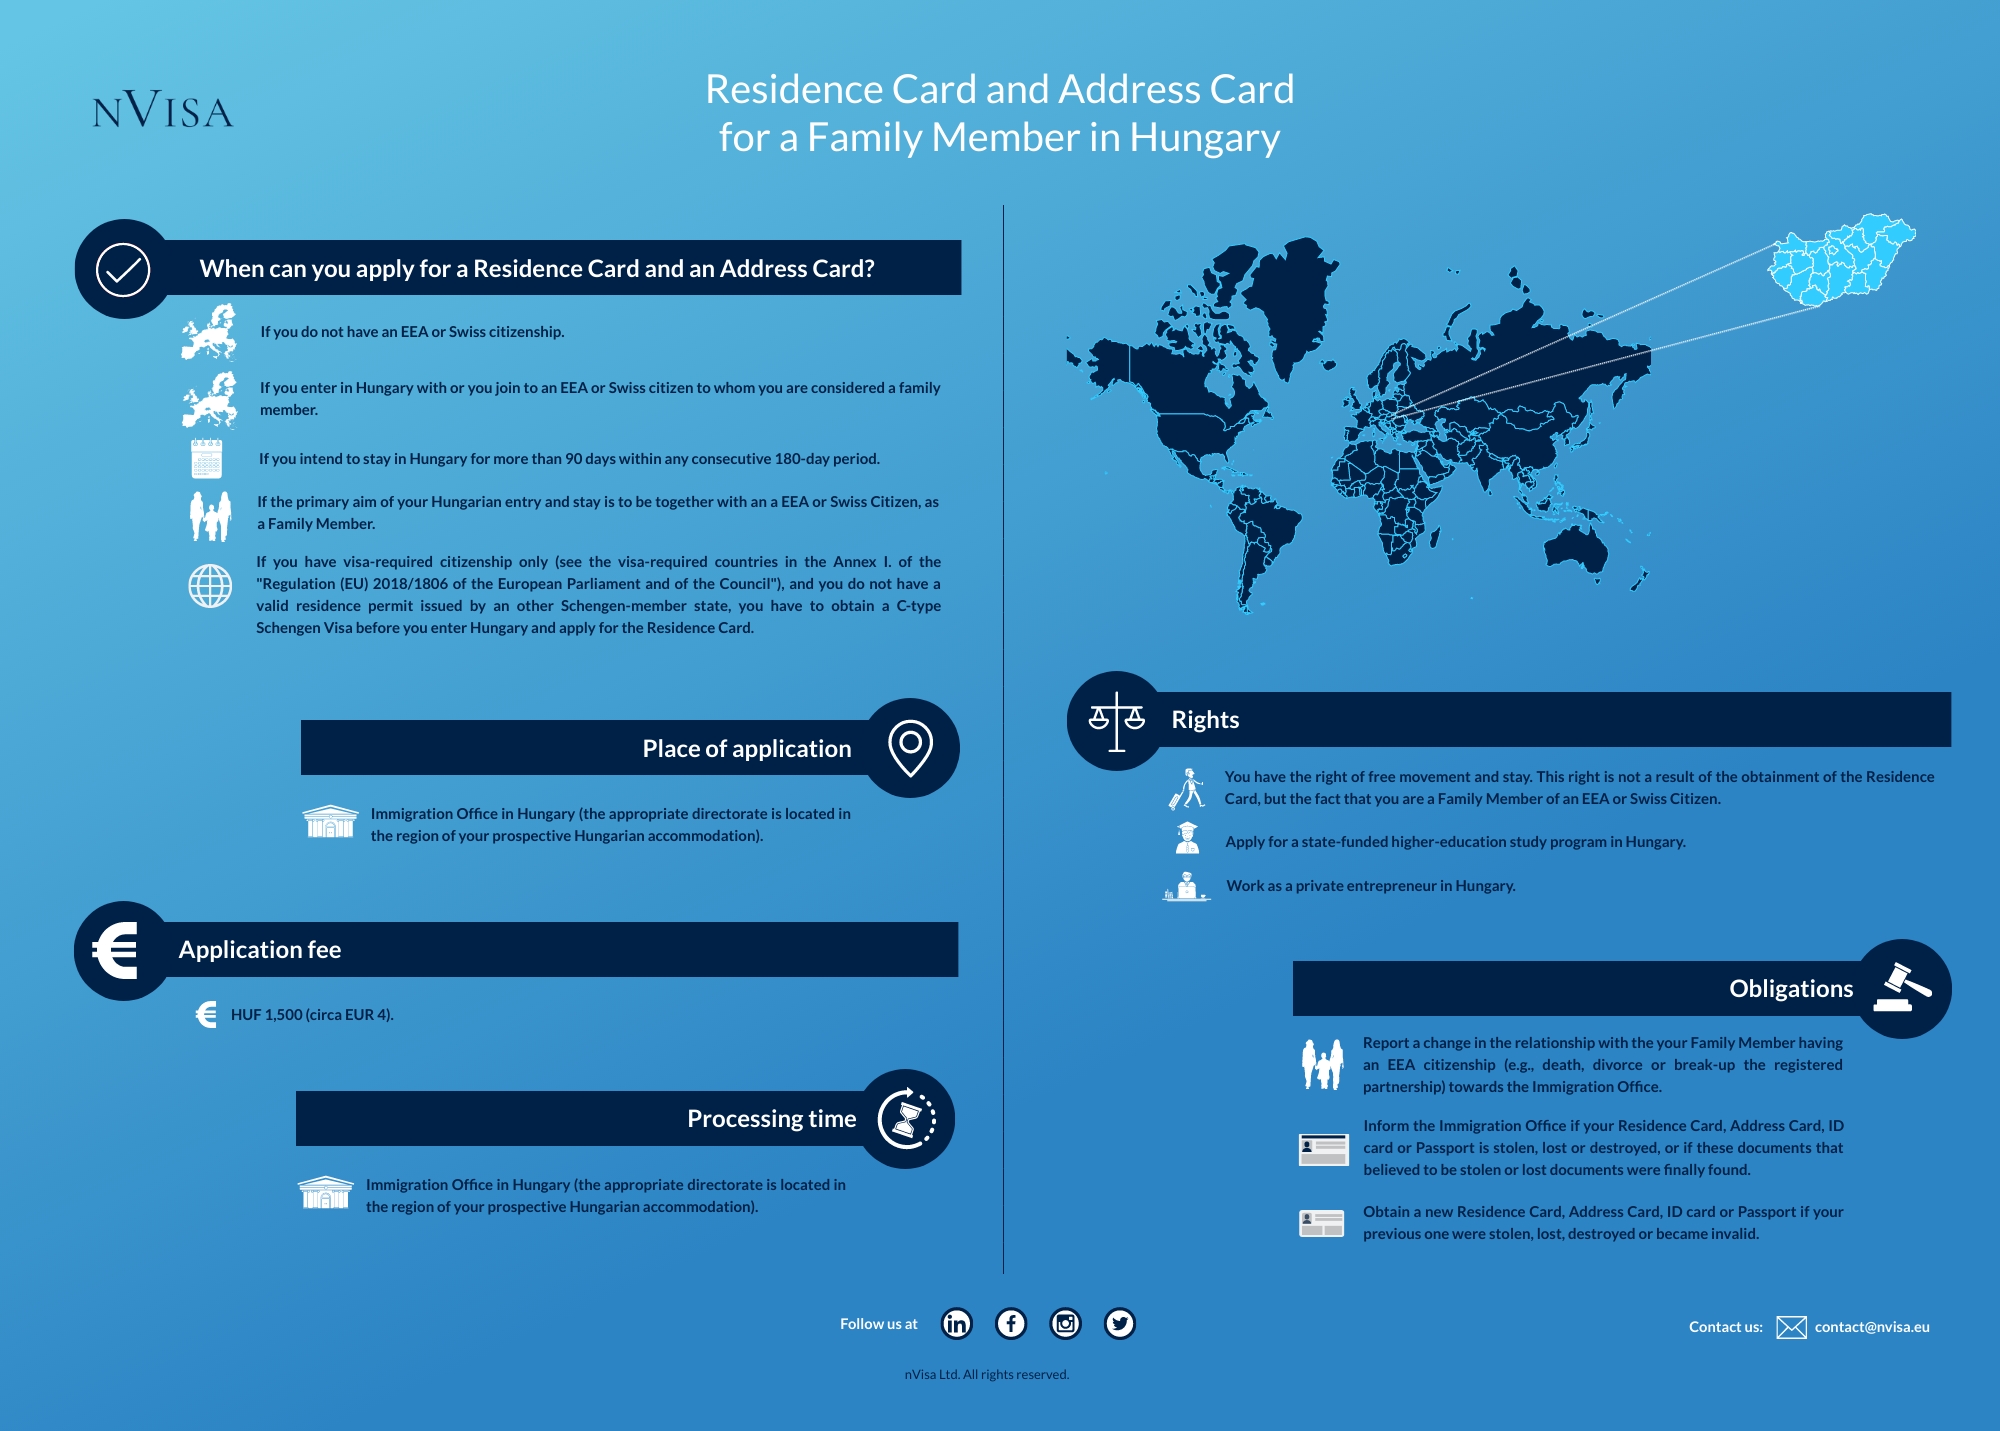 Infographic about immigration requirements and the details of obtaining a Hungarian Residence Card and Address Card for a third-country National, who stays in Hungary as a Family Member of an EEA Citizen.